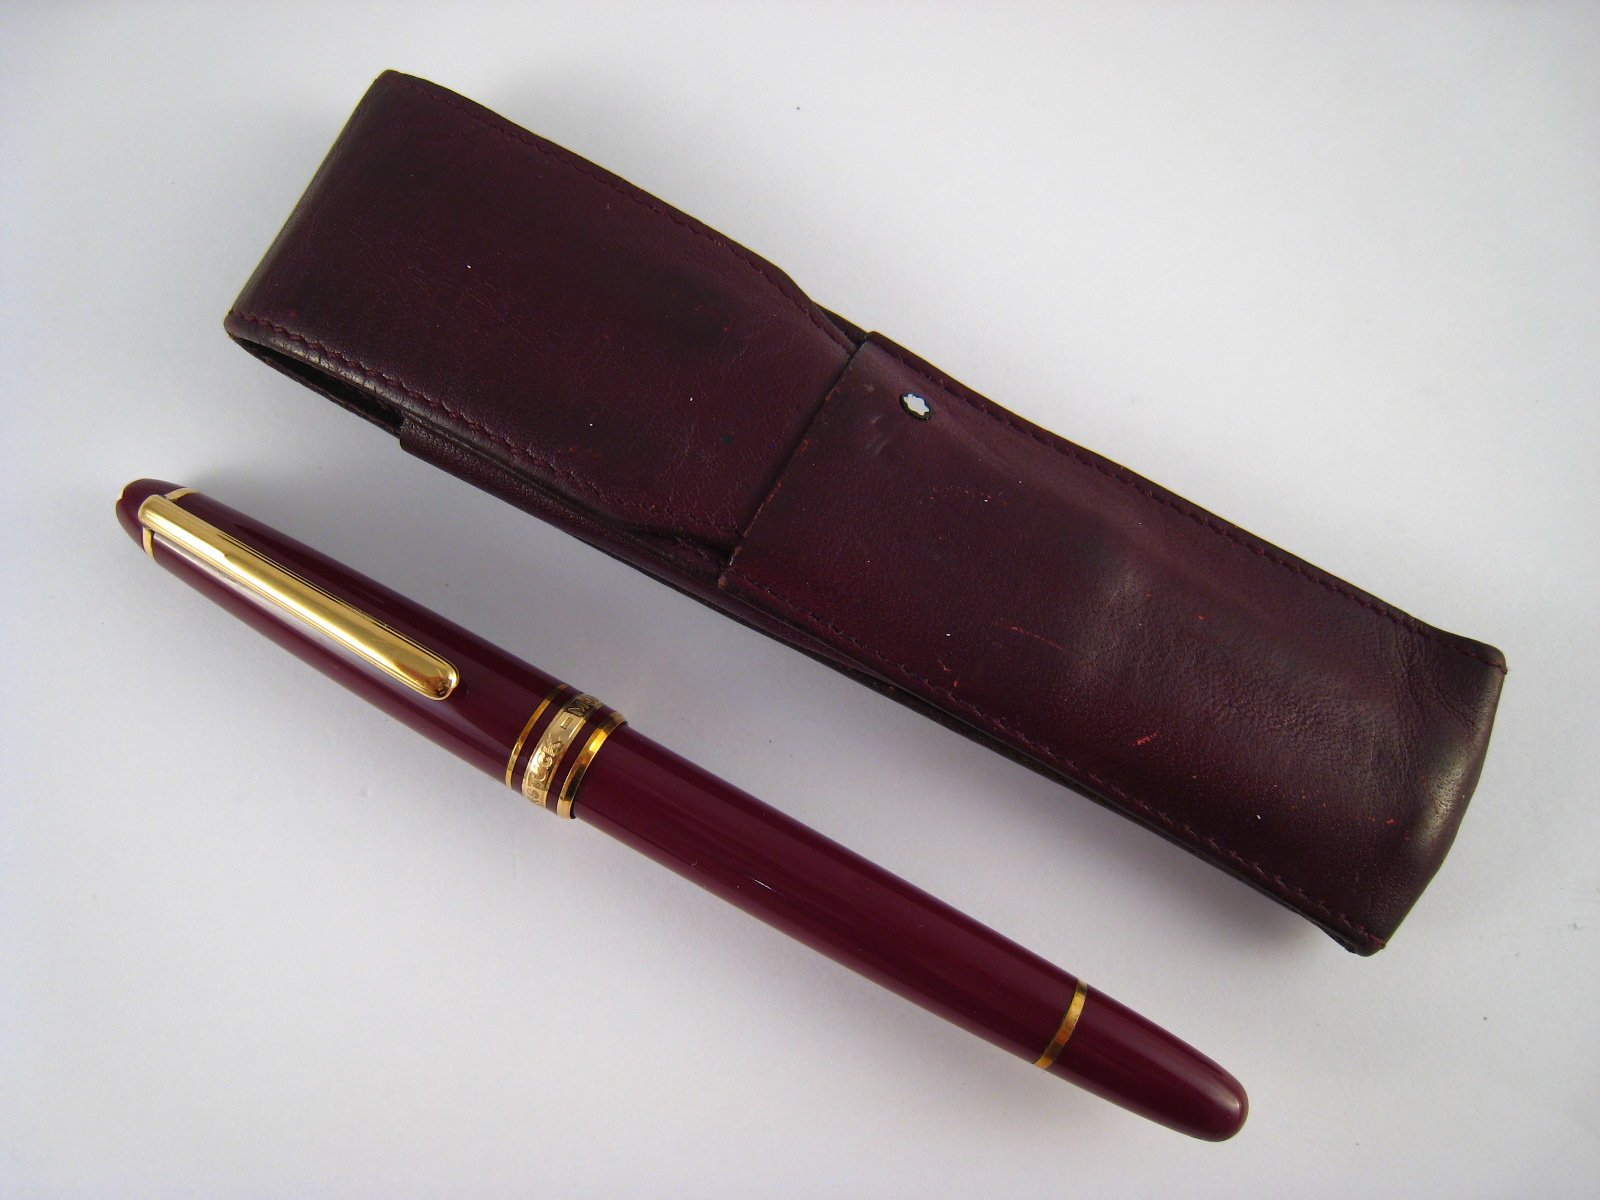 A Montblanc Meisterstuck ballpoint pen in leather case.